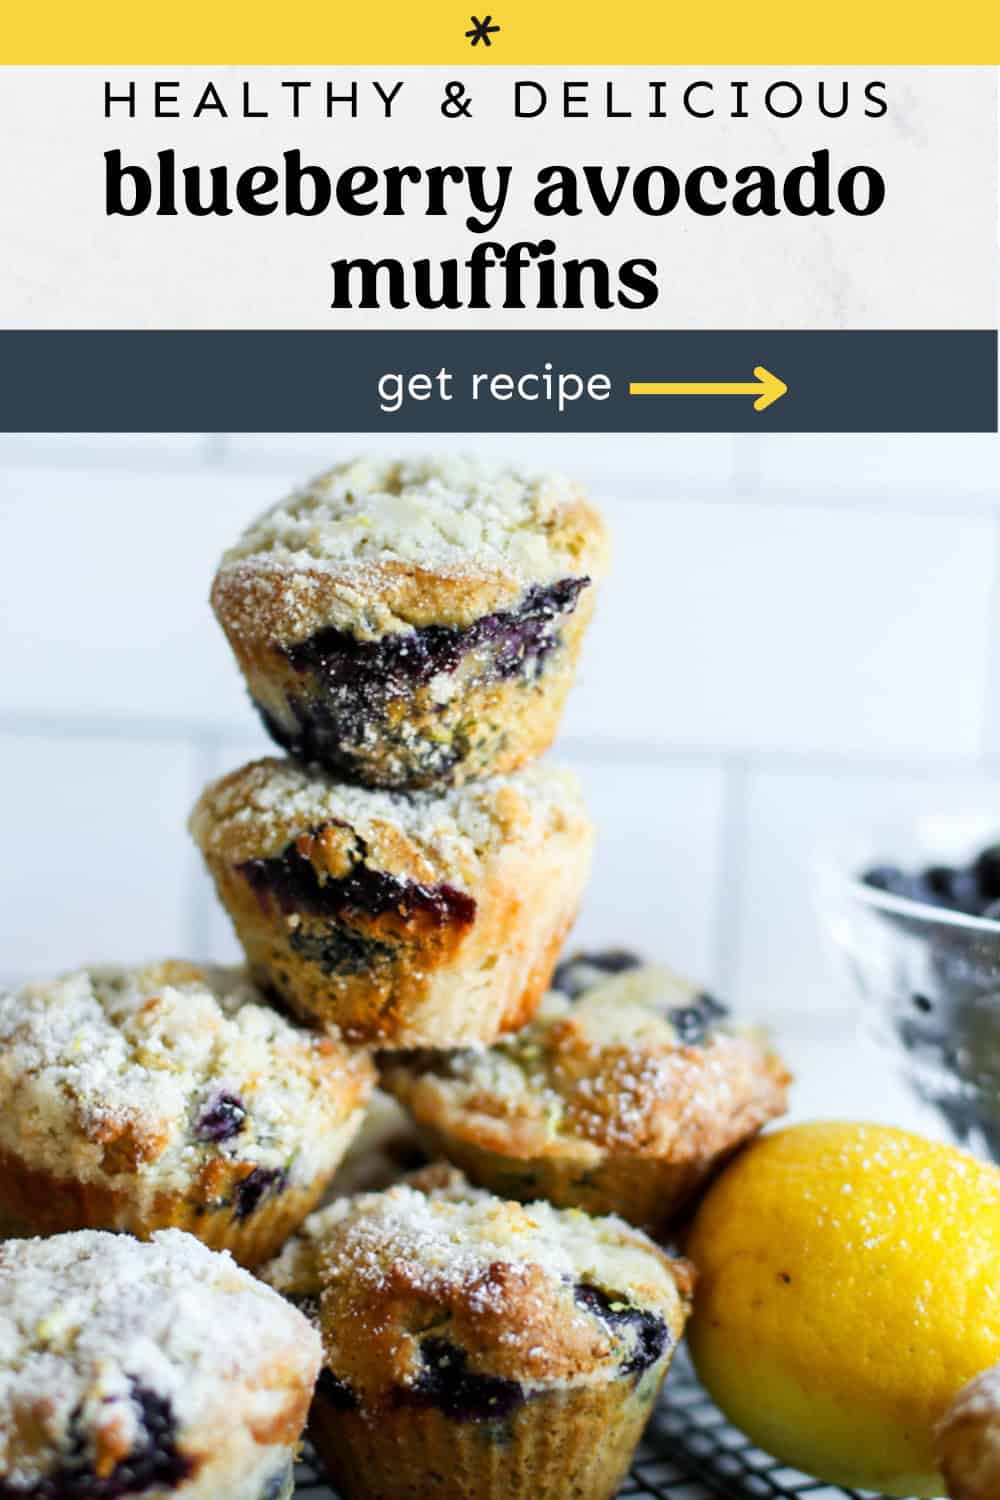 Blueberry avocado muffins stacked up on a baking rack.